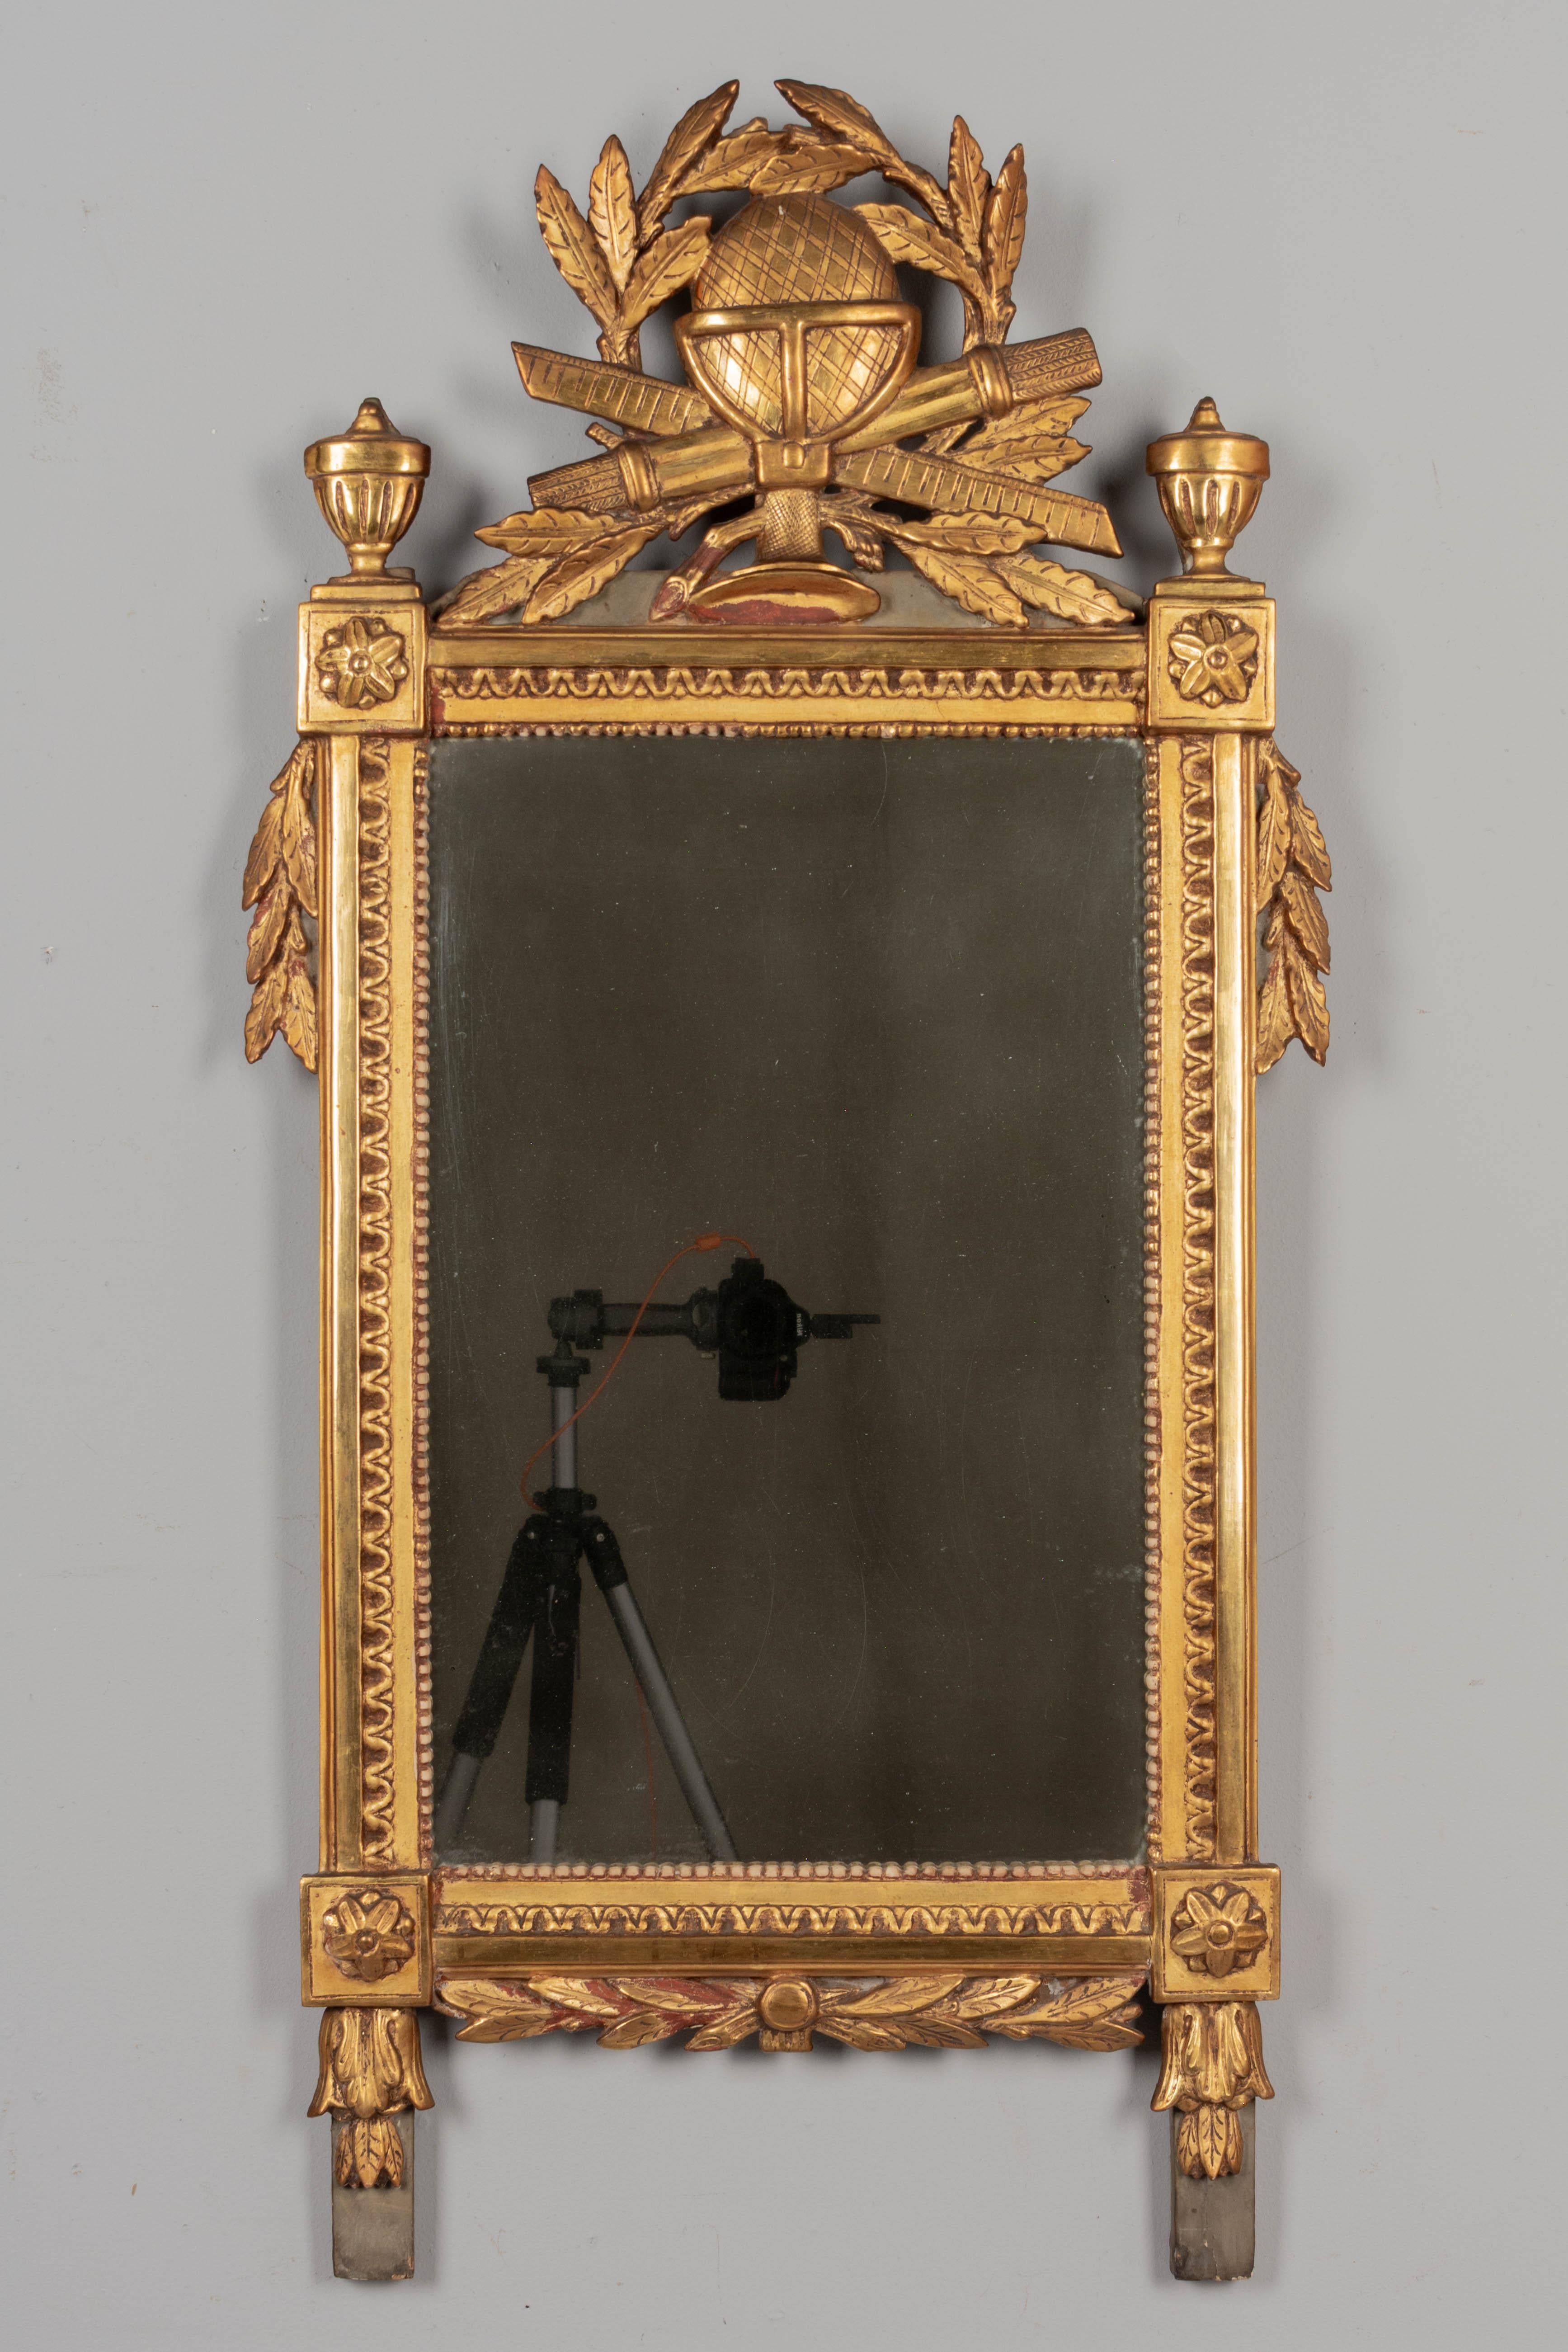 An 18th century Louis XVI French giltwood mirror. Carved pine frame with warm gilt finish and verdigris painted details. Beautifully detailed hand-carved crest with an orb surrounded by a laurel wreath and garlands that drape down the sides, corner